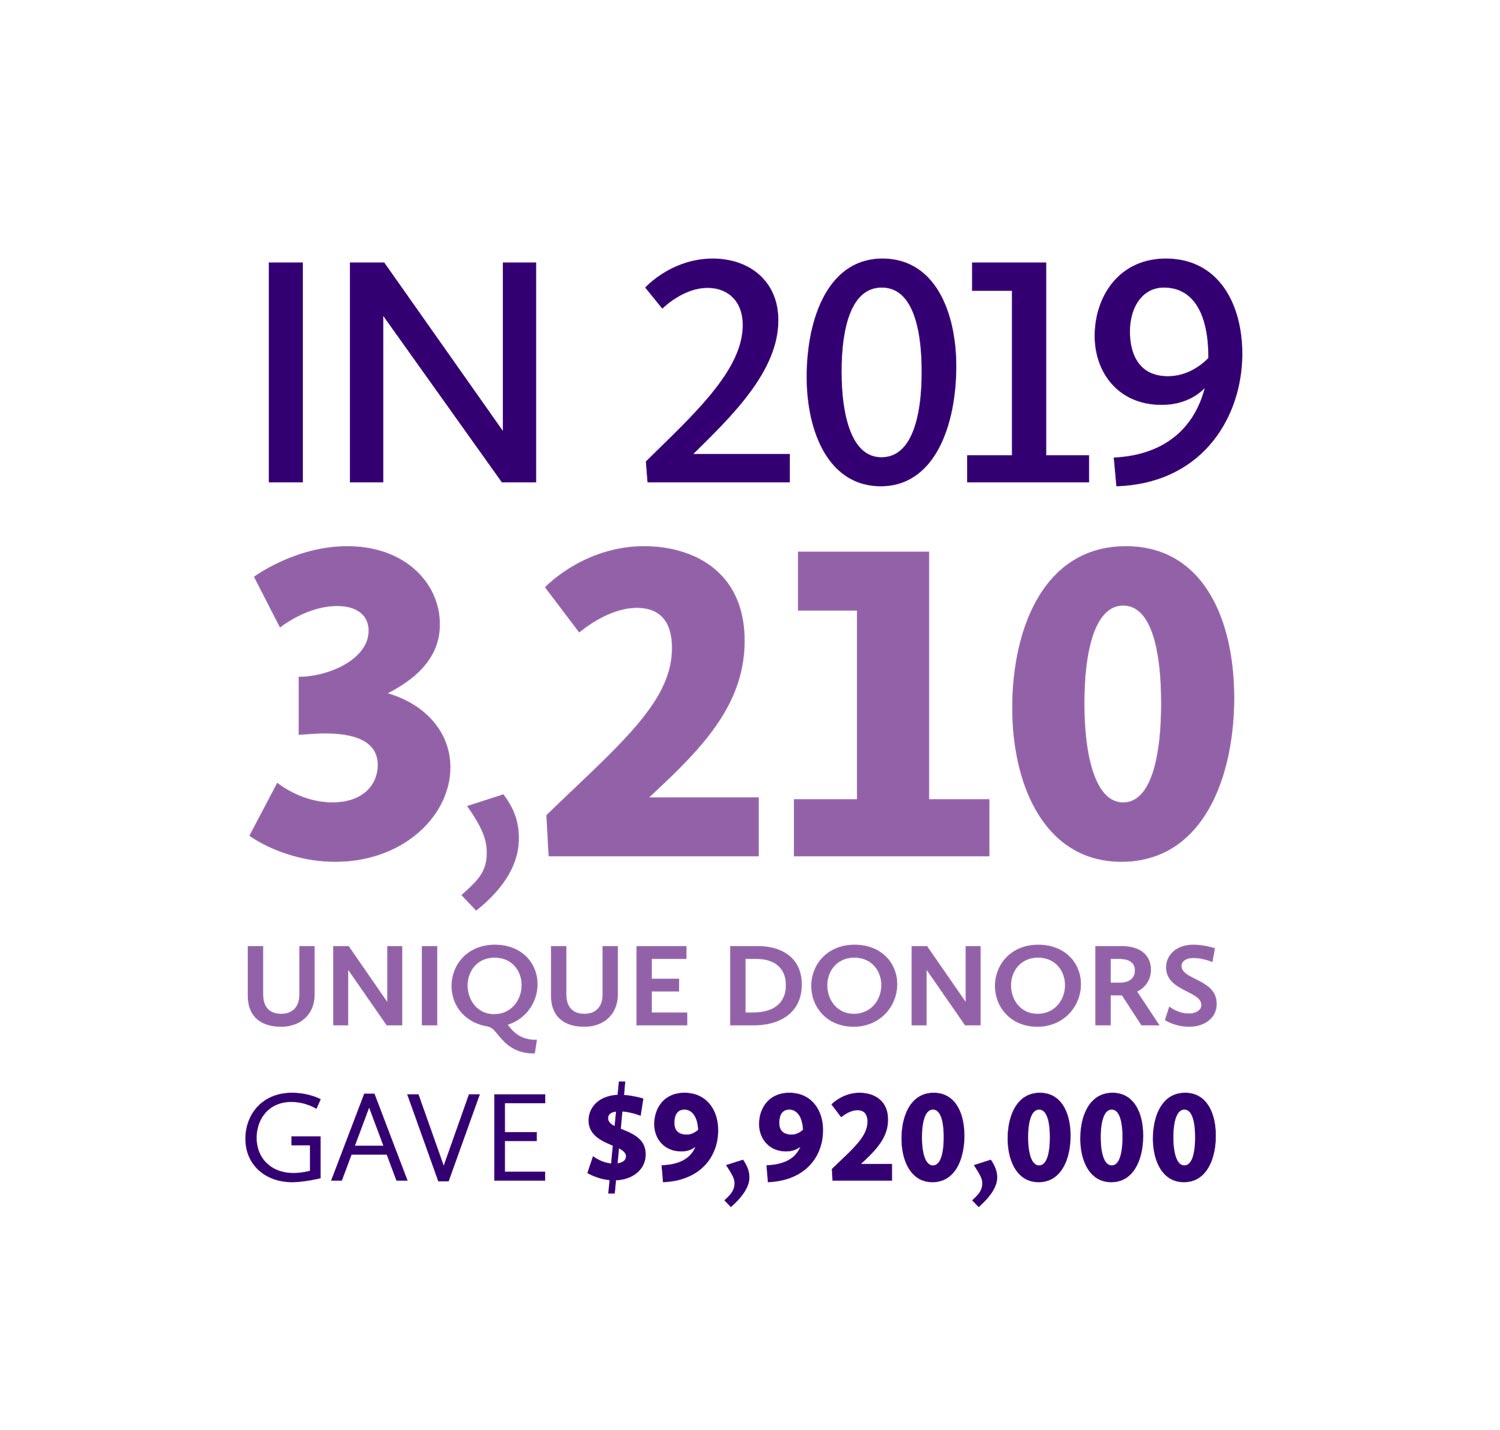 In 2019 3,210 unique donors gave a total of $9,920,000.